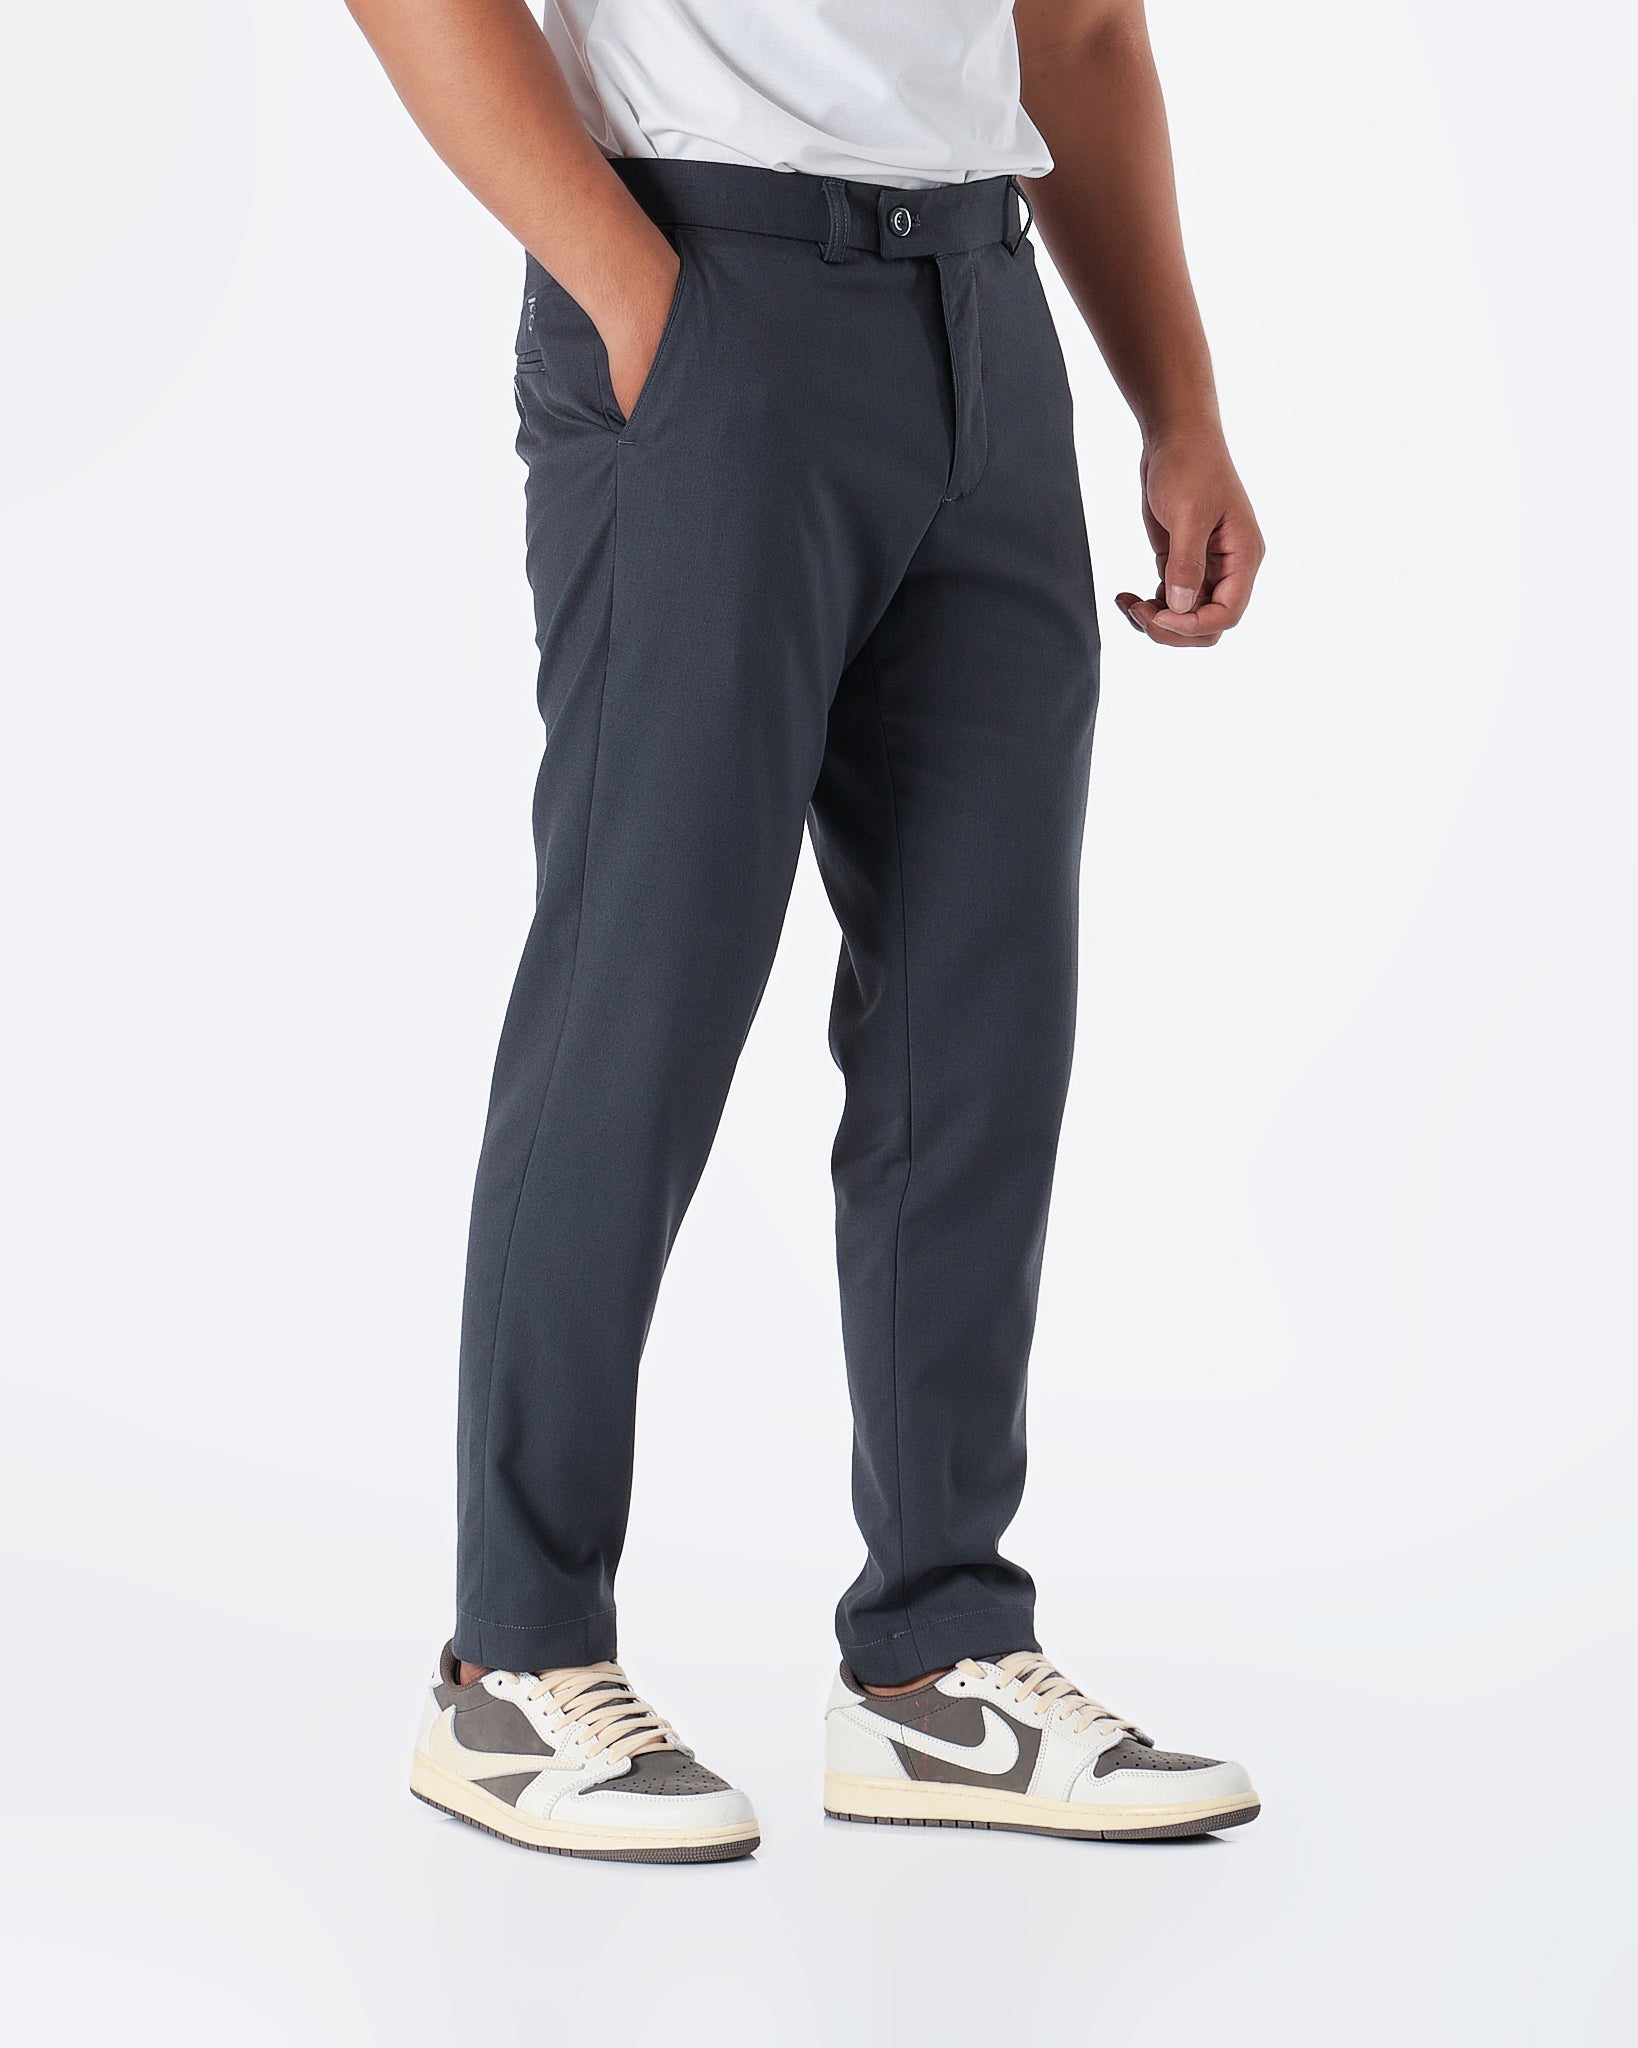 MOI OUTFIT-Slim Fit Logo Embroidered Men Pants 25.90